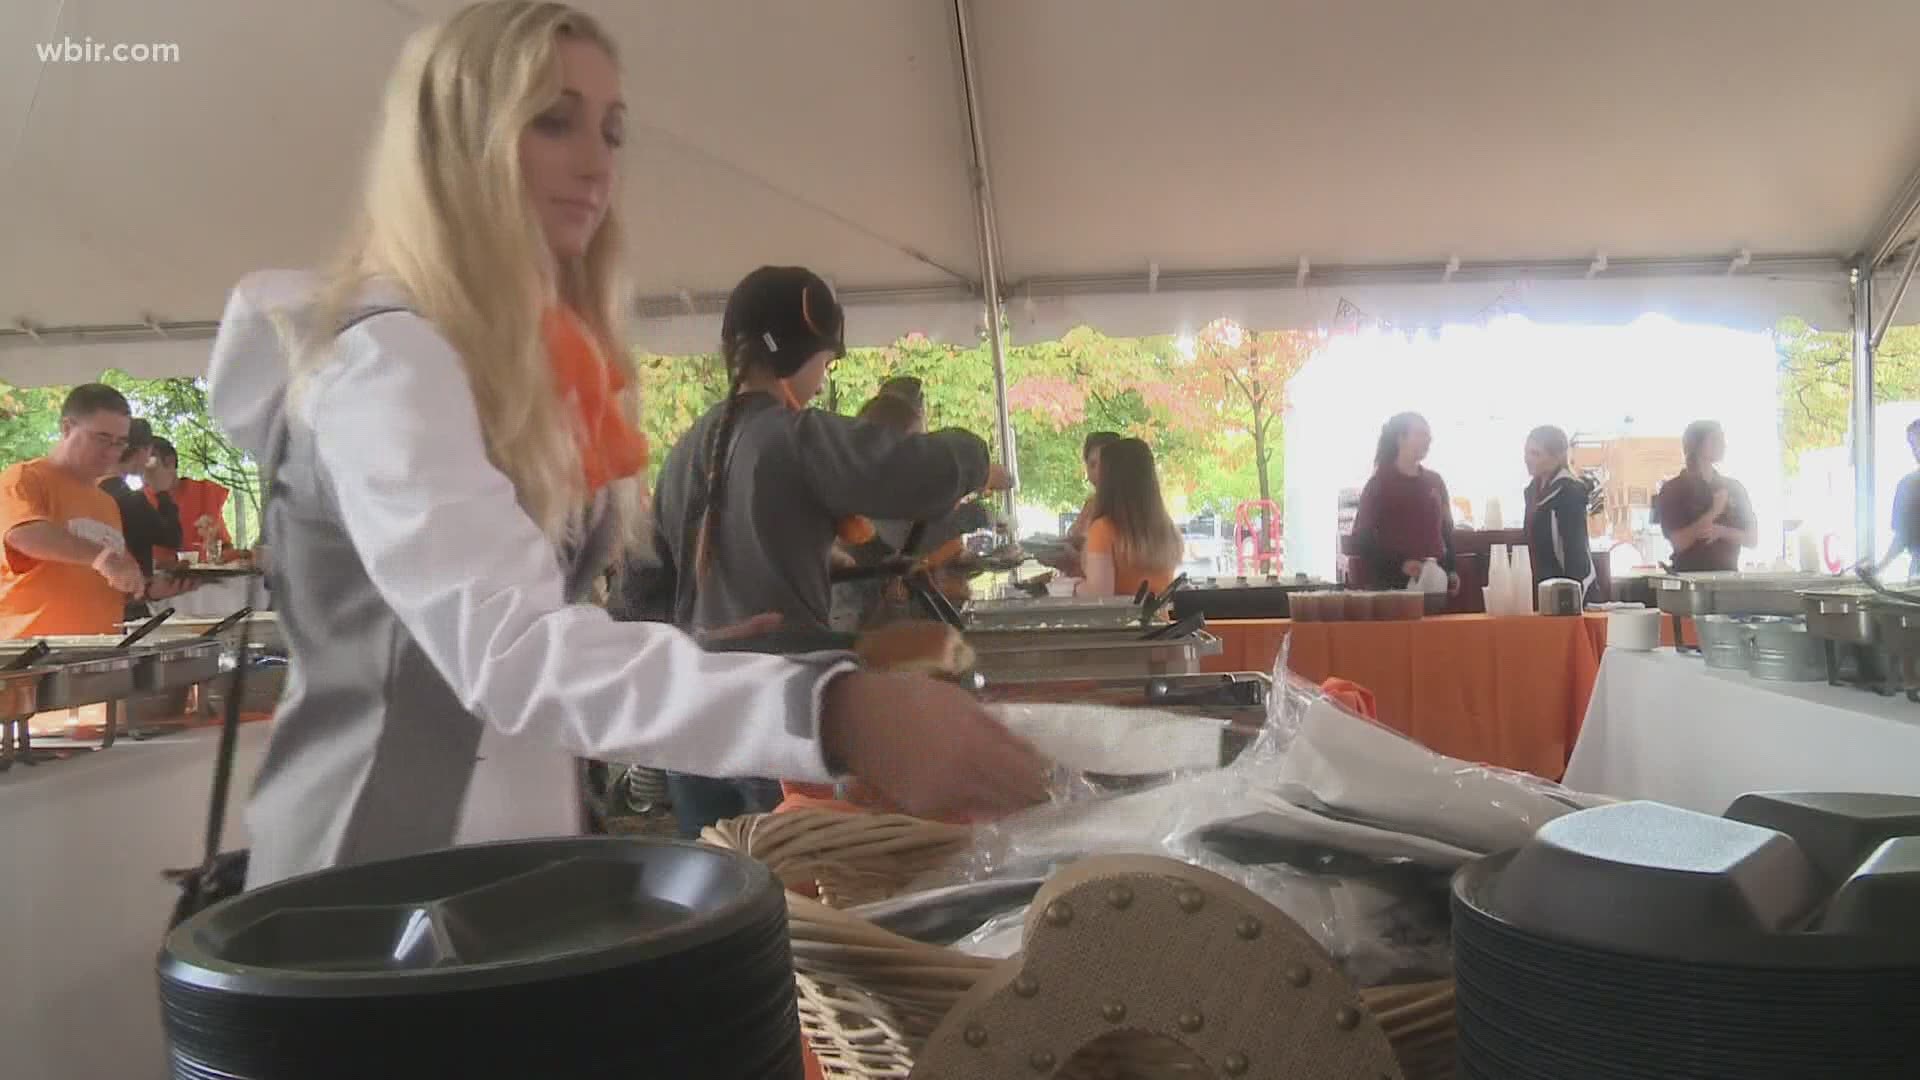 The University of Tennessee announced there will be no university-organized tailgating on campus for football.